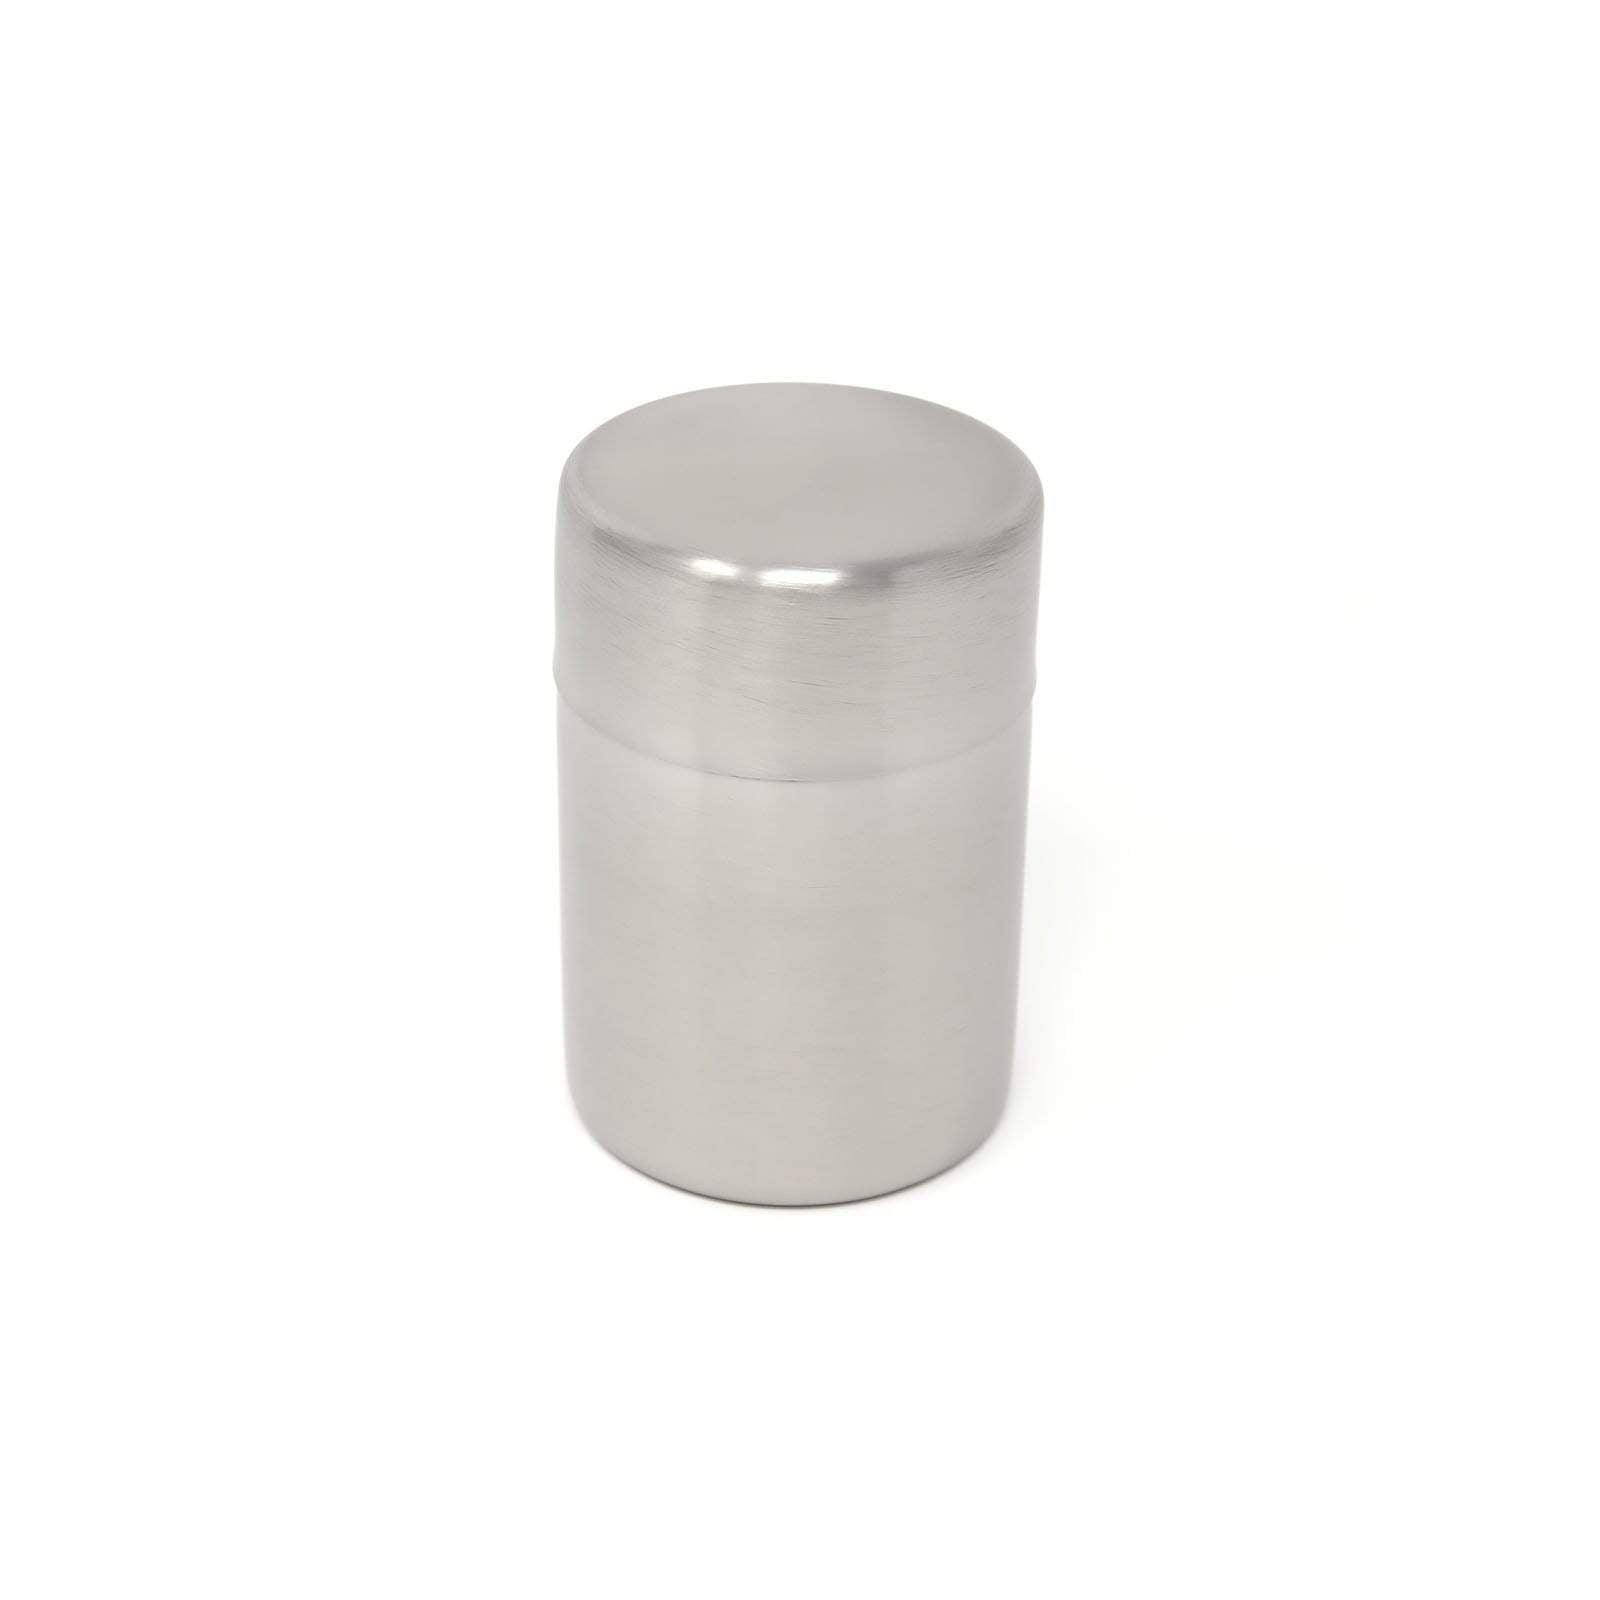 https://www.globalkitchenjapan.com/cdn/shop/products/asahi-stainless-steel-loose-tea-leaf-canister-chazutsu-tea-caddy-200ml-canisters-6927383199827_1600x.jpg?v=1564098617